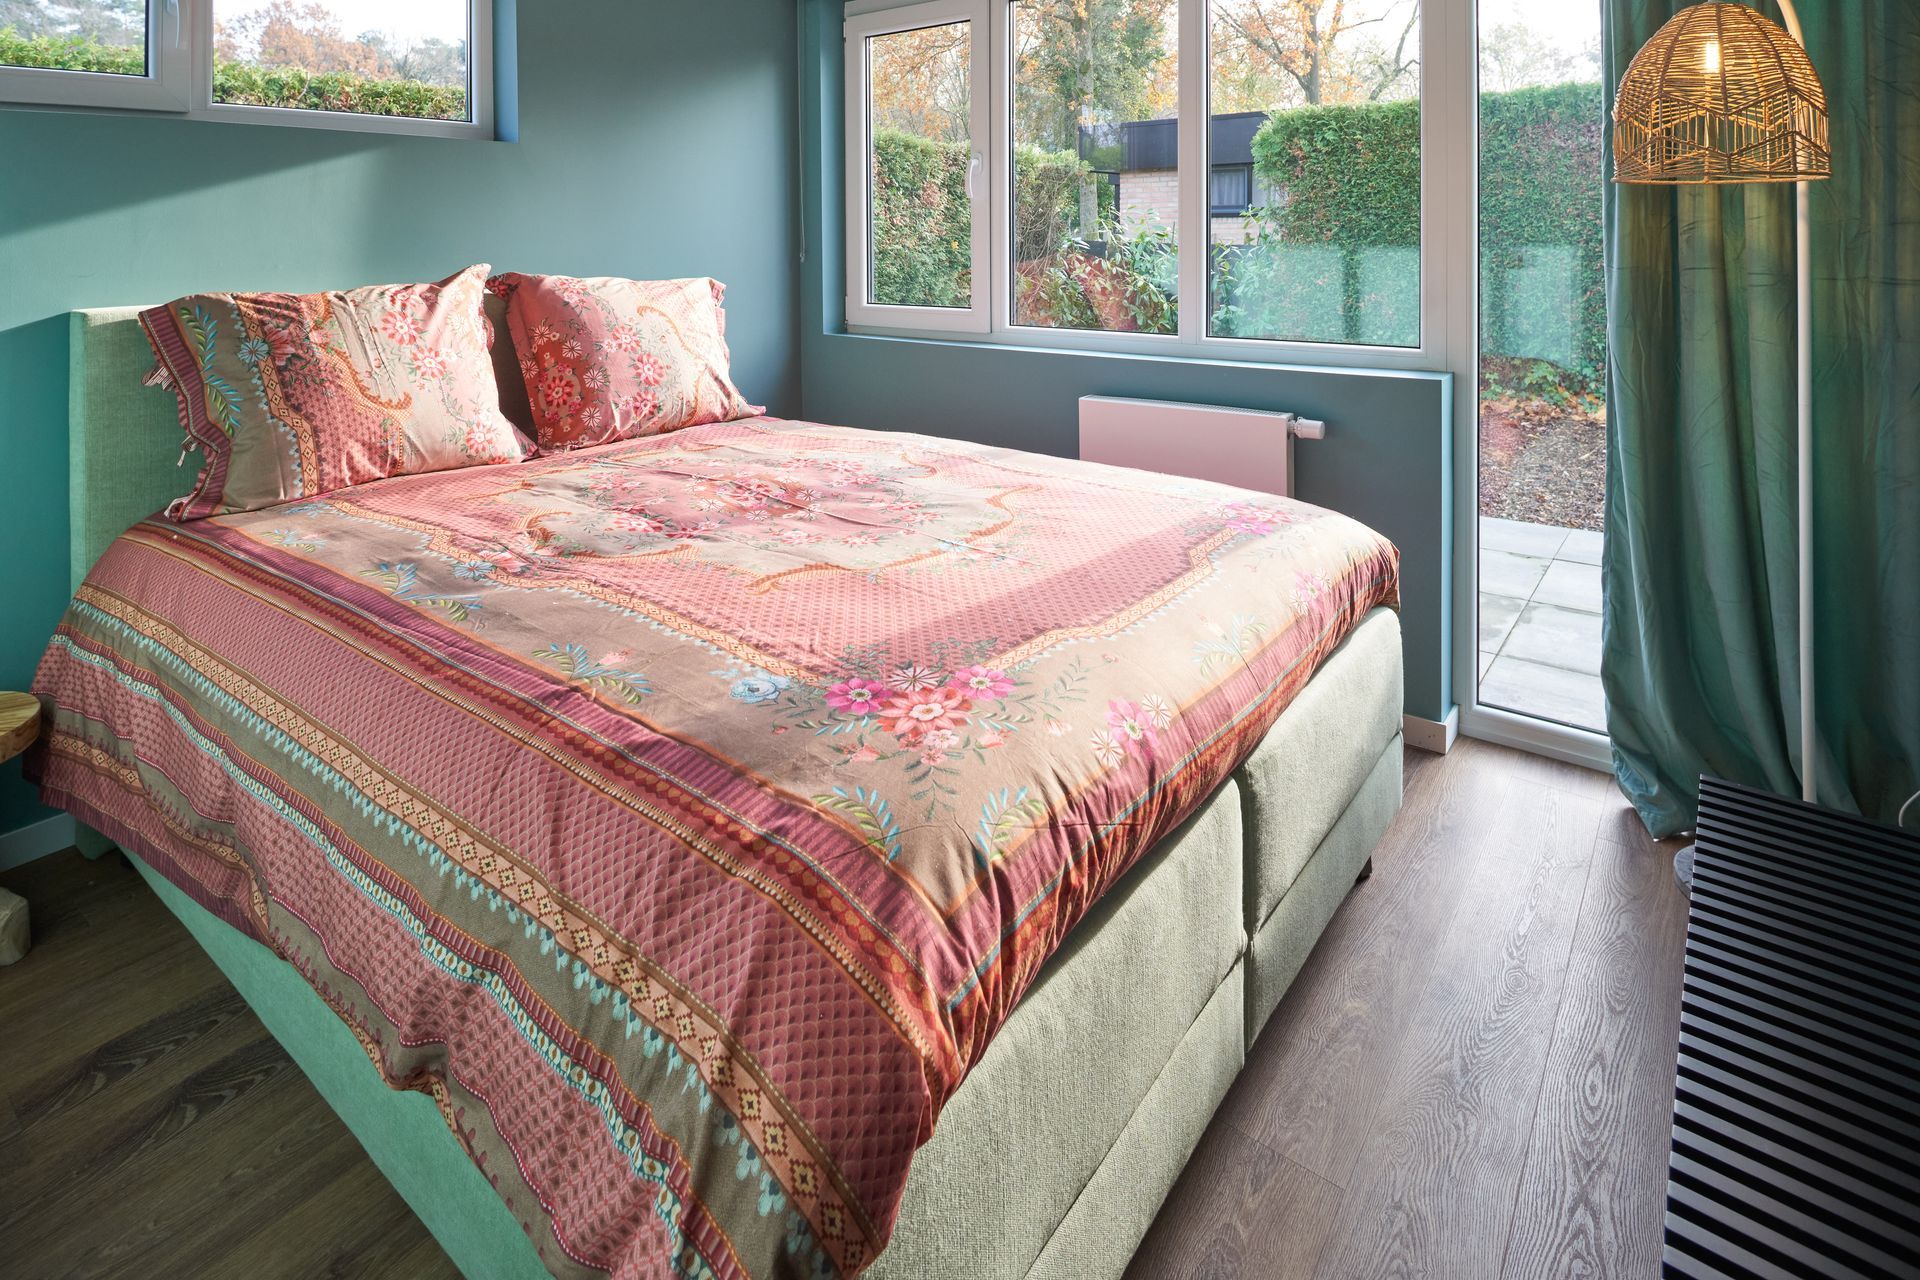 a bed with a pink comforter and pillows in a bedroom - Lacuna Vita holiday home